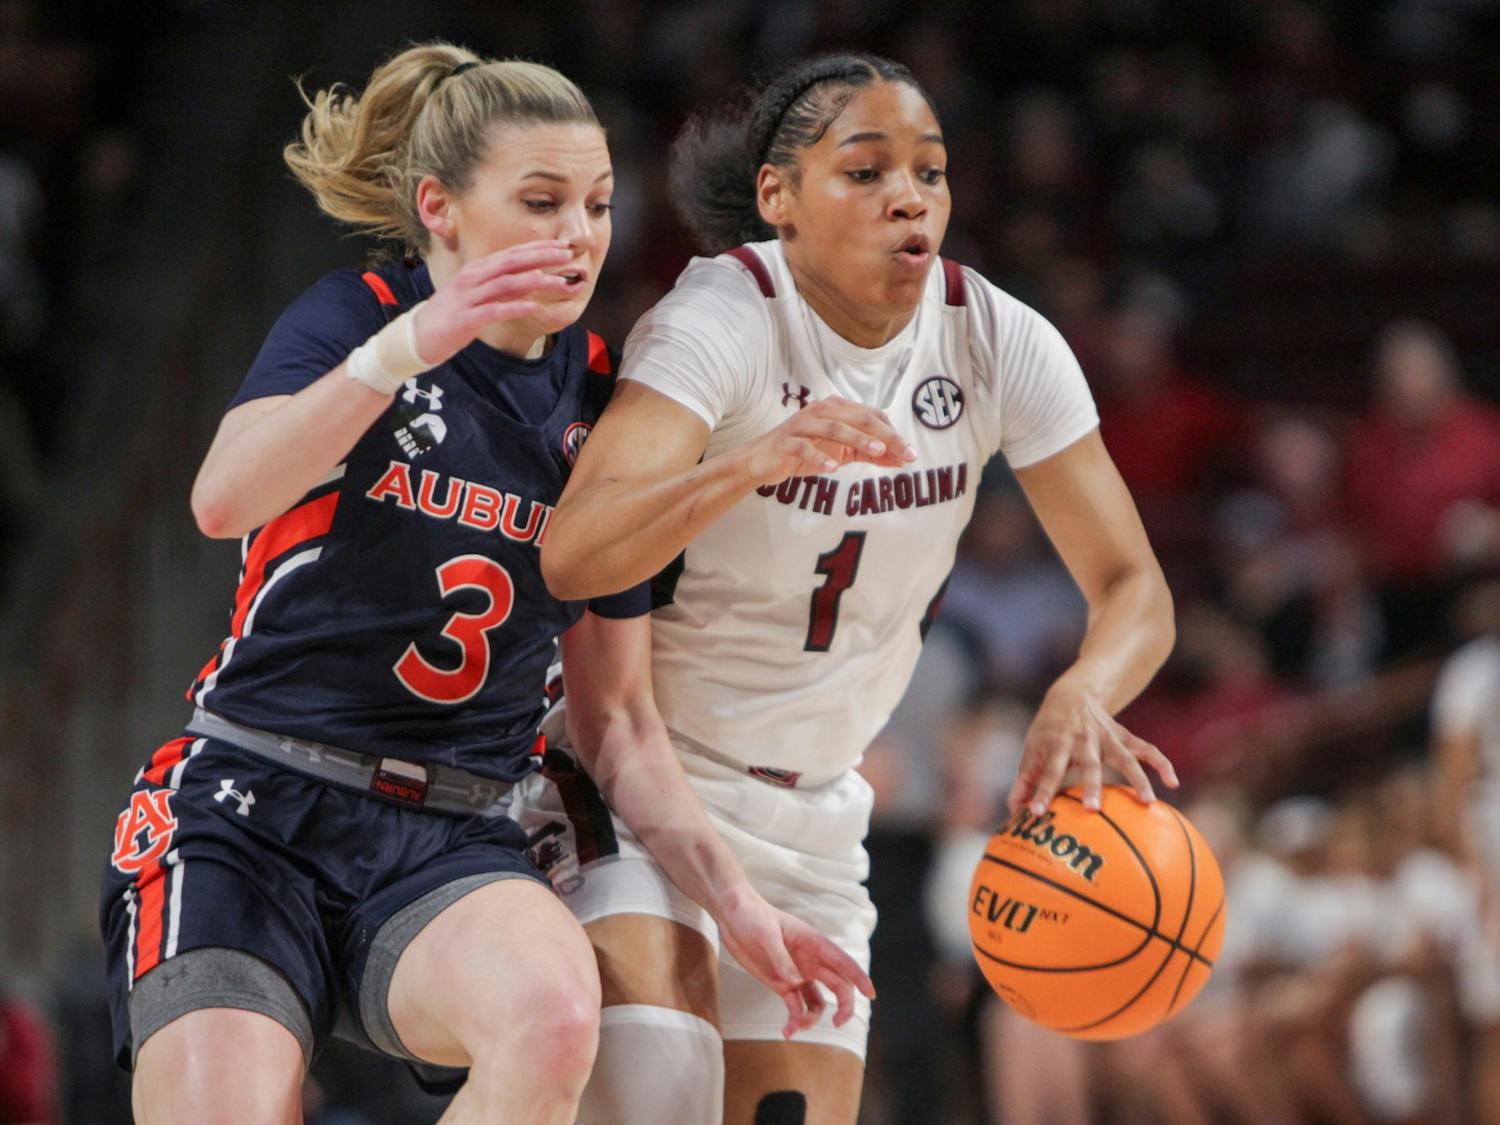 The South Carolina women's basketball team beat Auburn 75-38 on Feb. 17, 2022. Junior guard Zia Cooke led the team with 20 points.